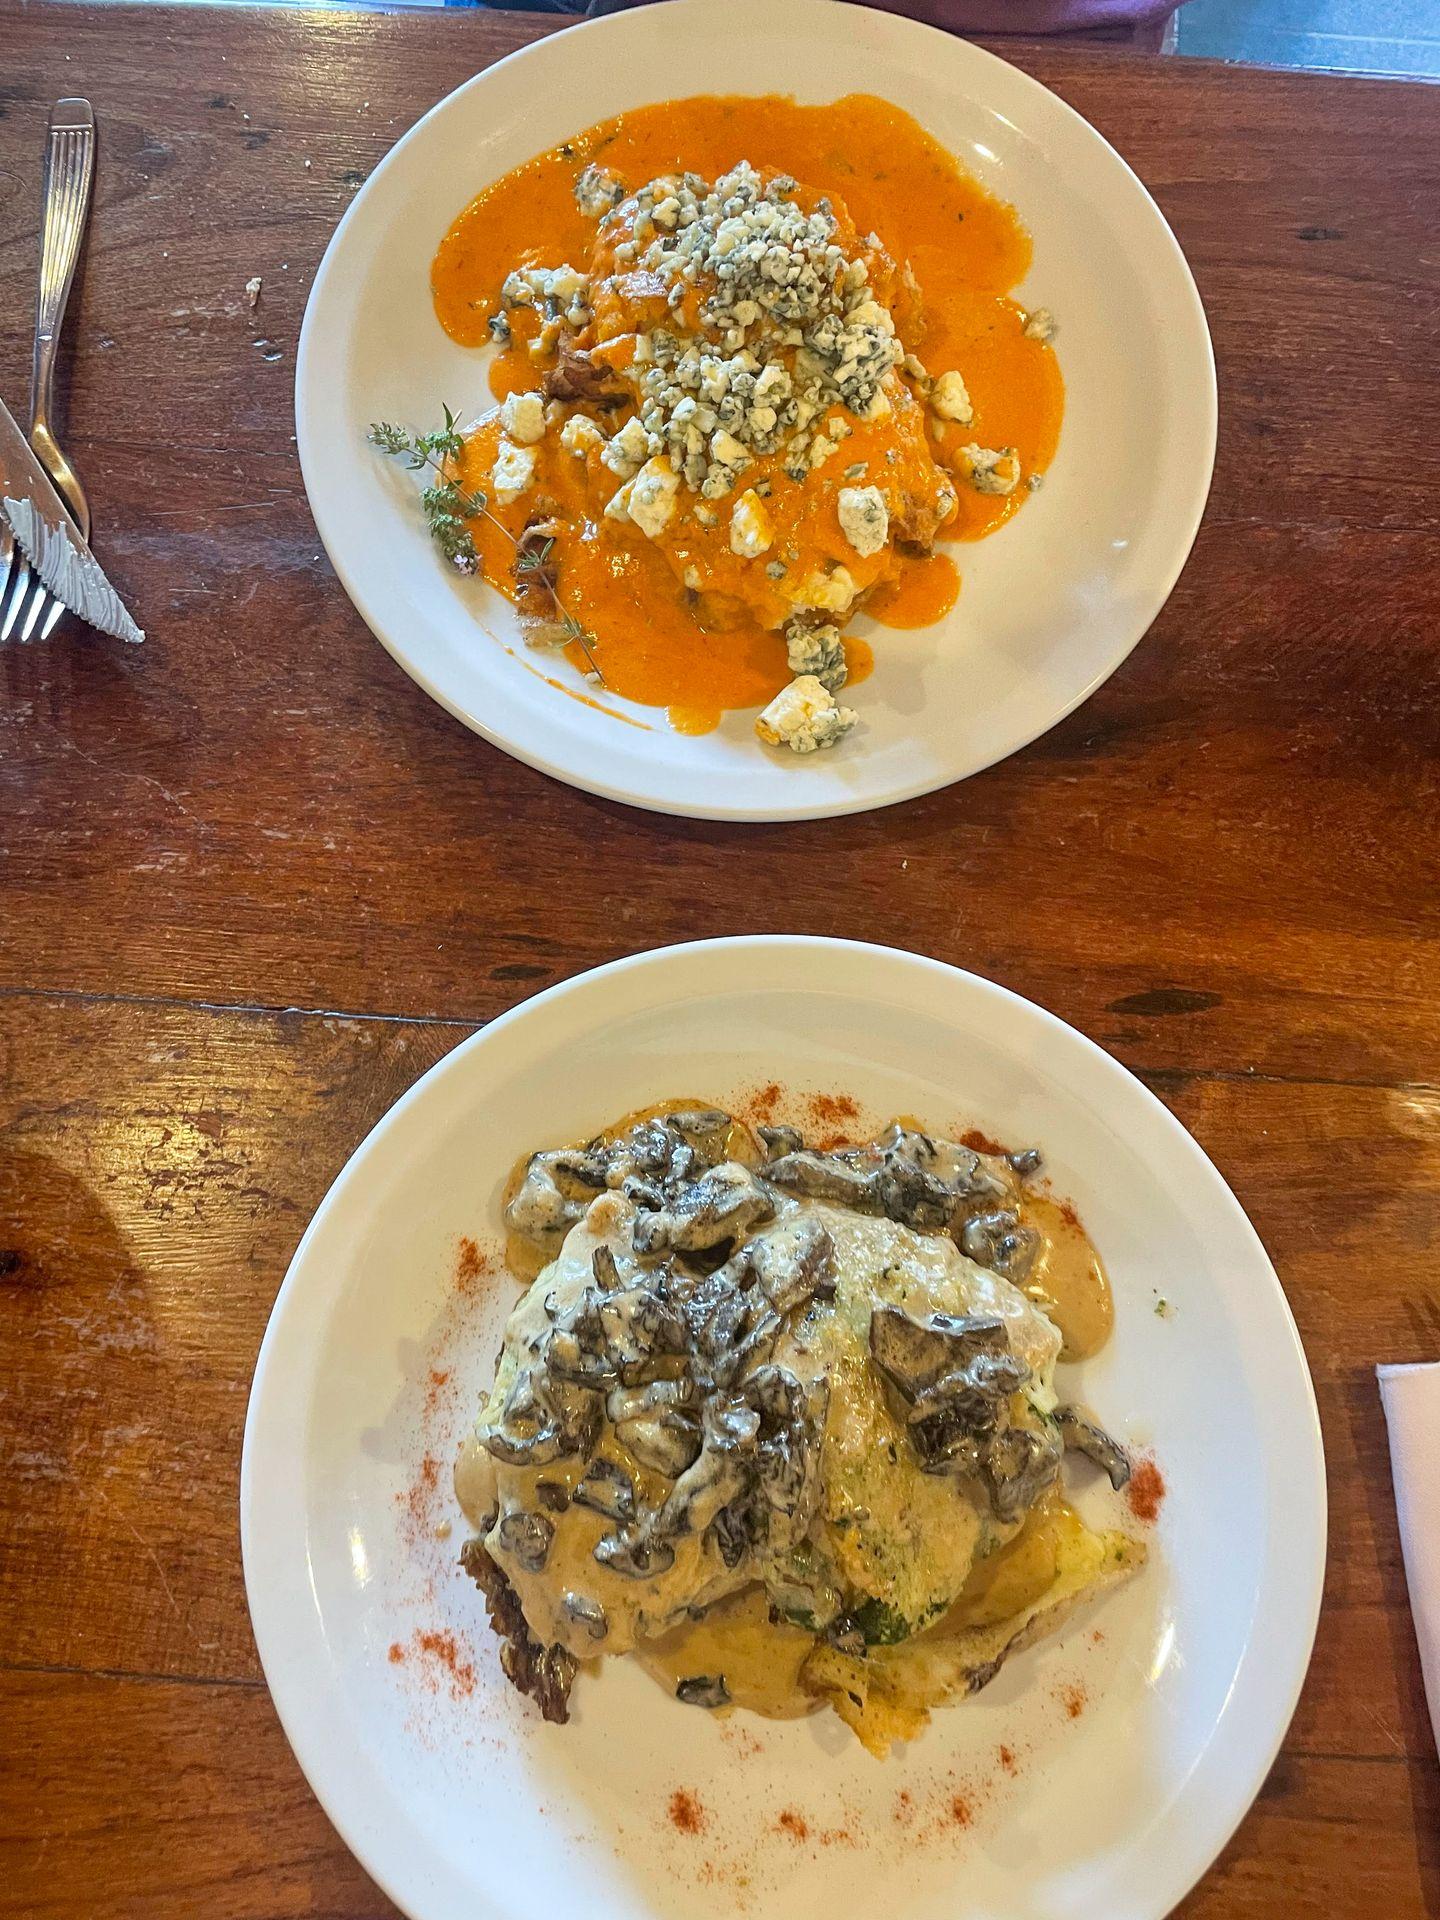 Two plates of ravioli. One is topped with mushrooms and the other is topped with an orange sauce and bleu cheese crumbles.